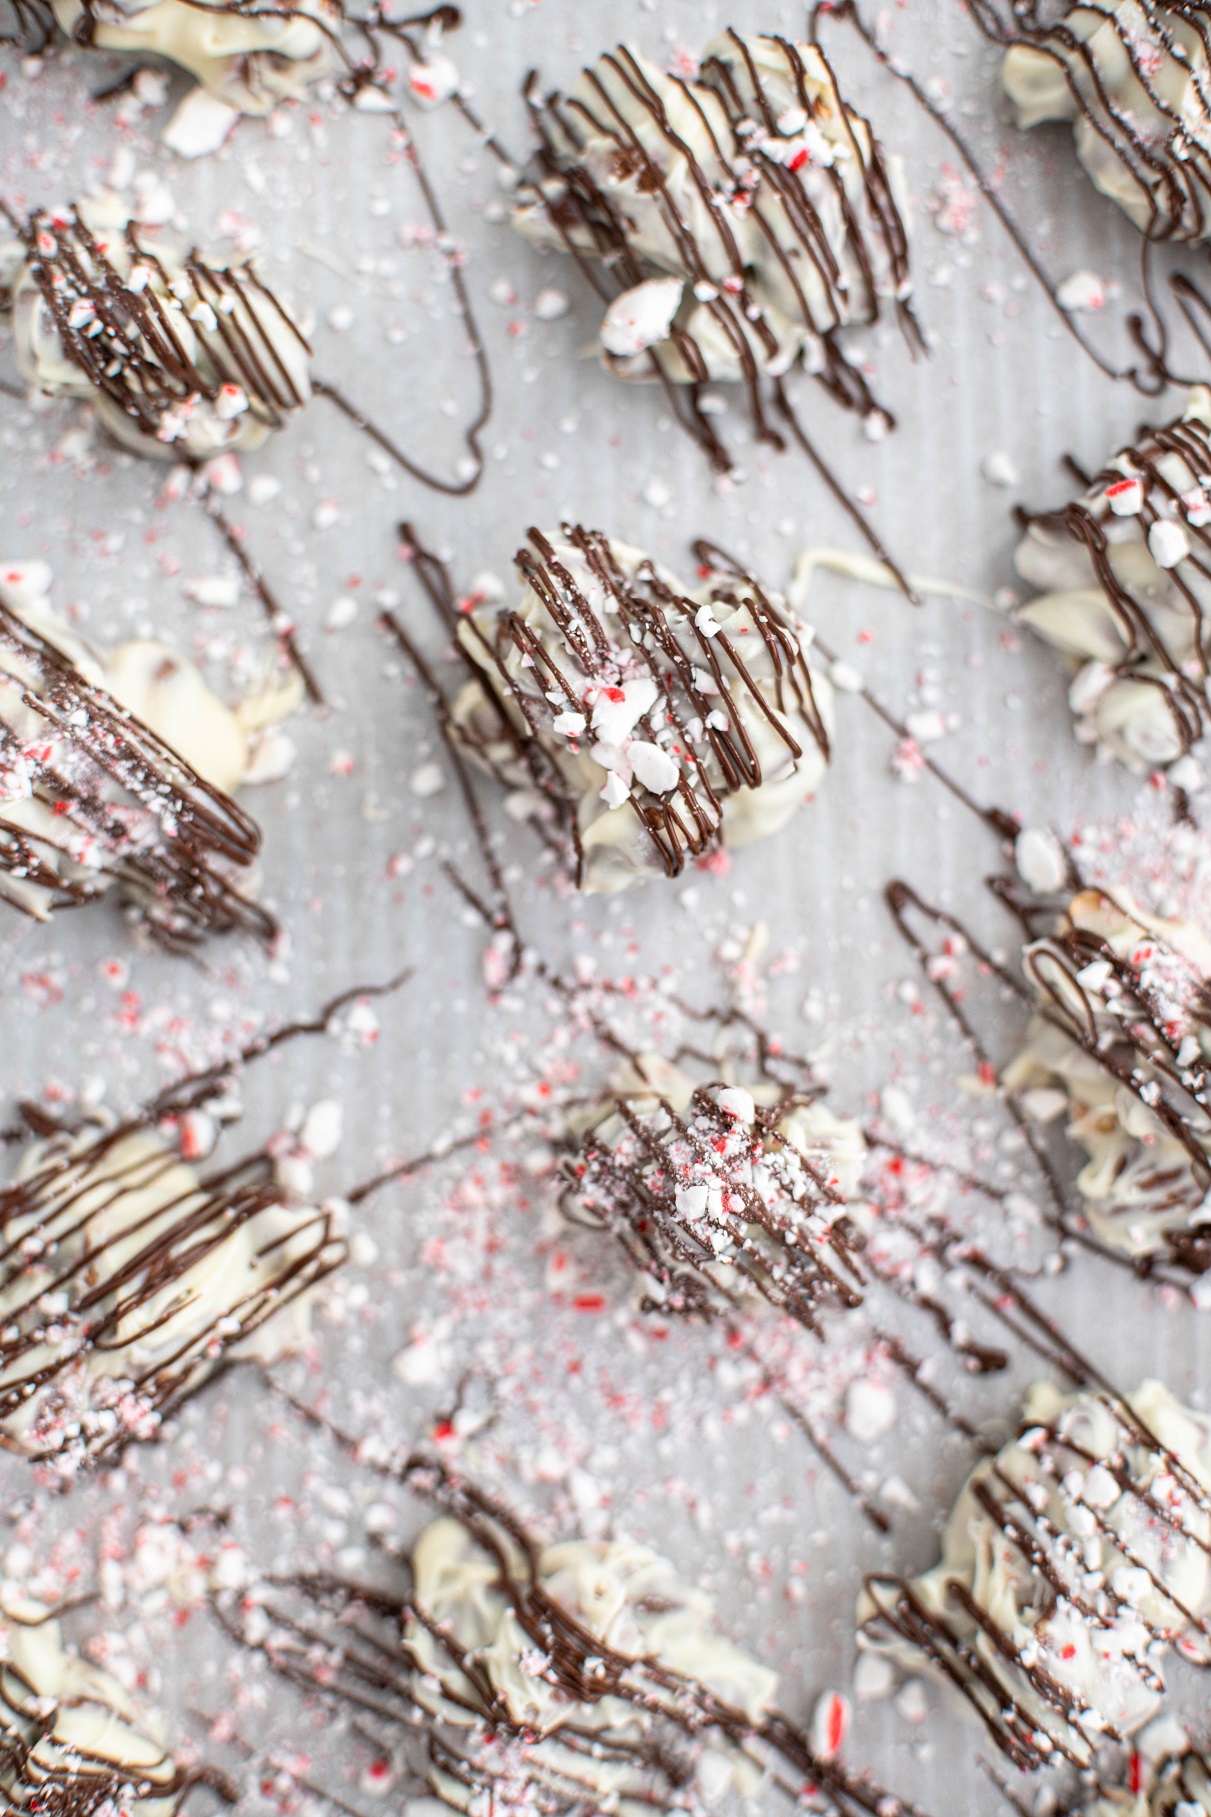 Peppermint bark almond clusters on parchment paper.